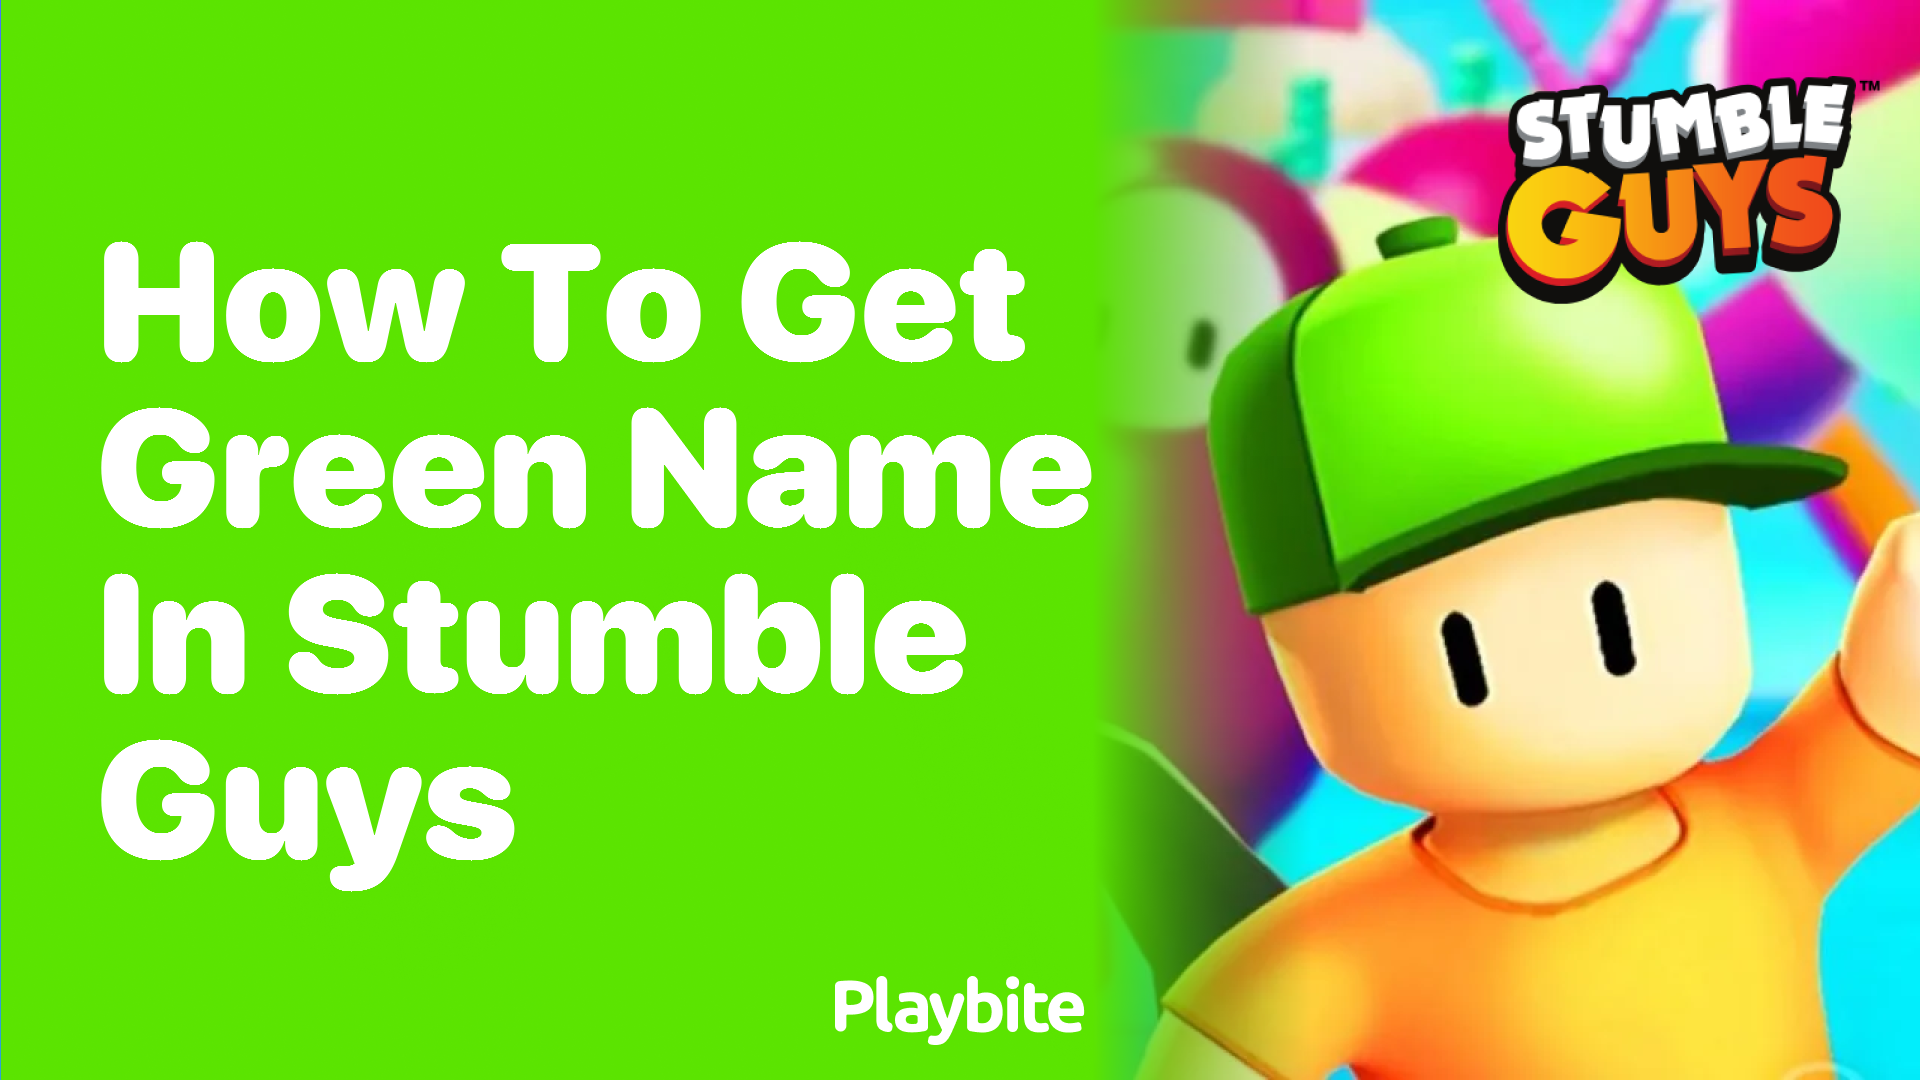 How to Get a Green Name in Stumble Guys?